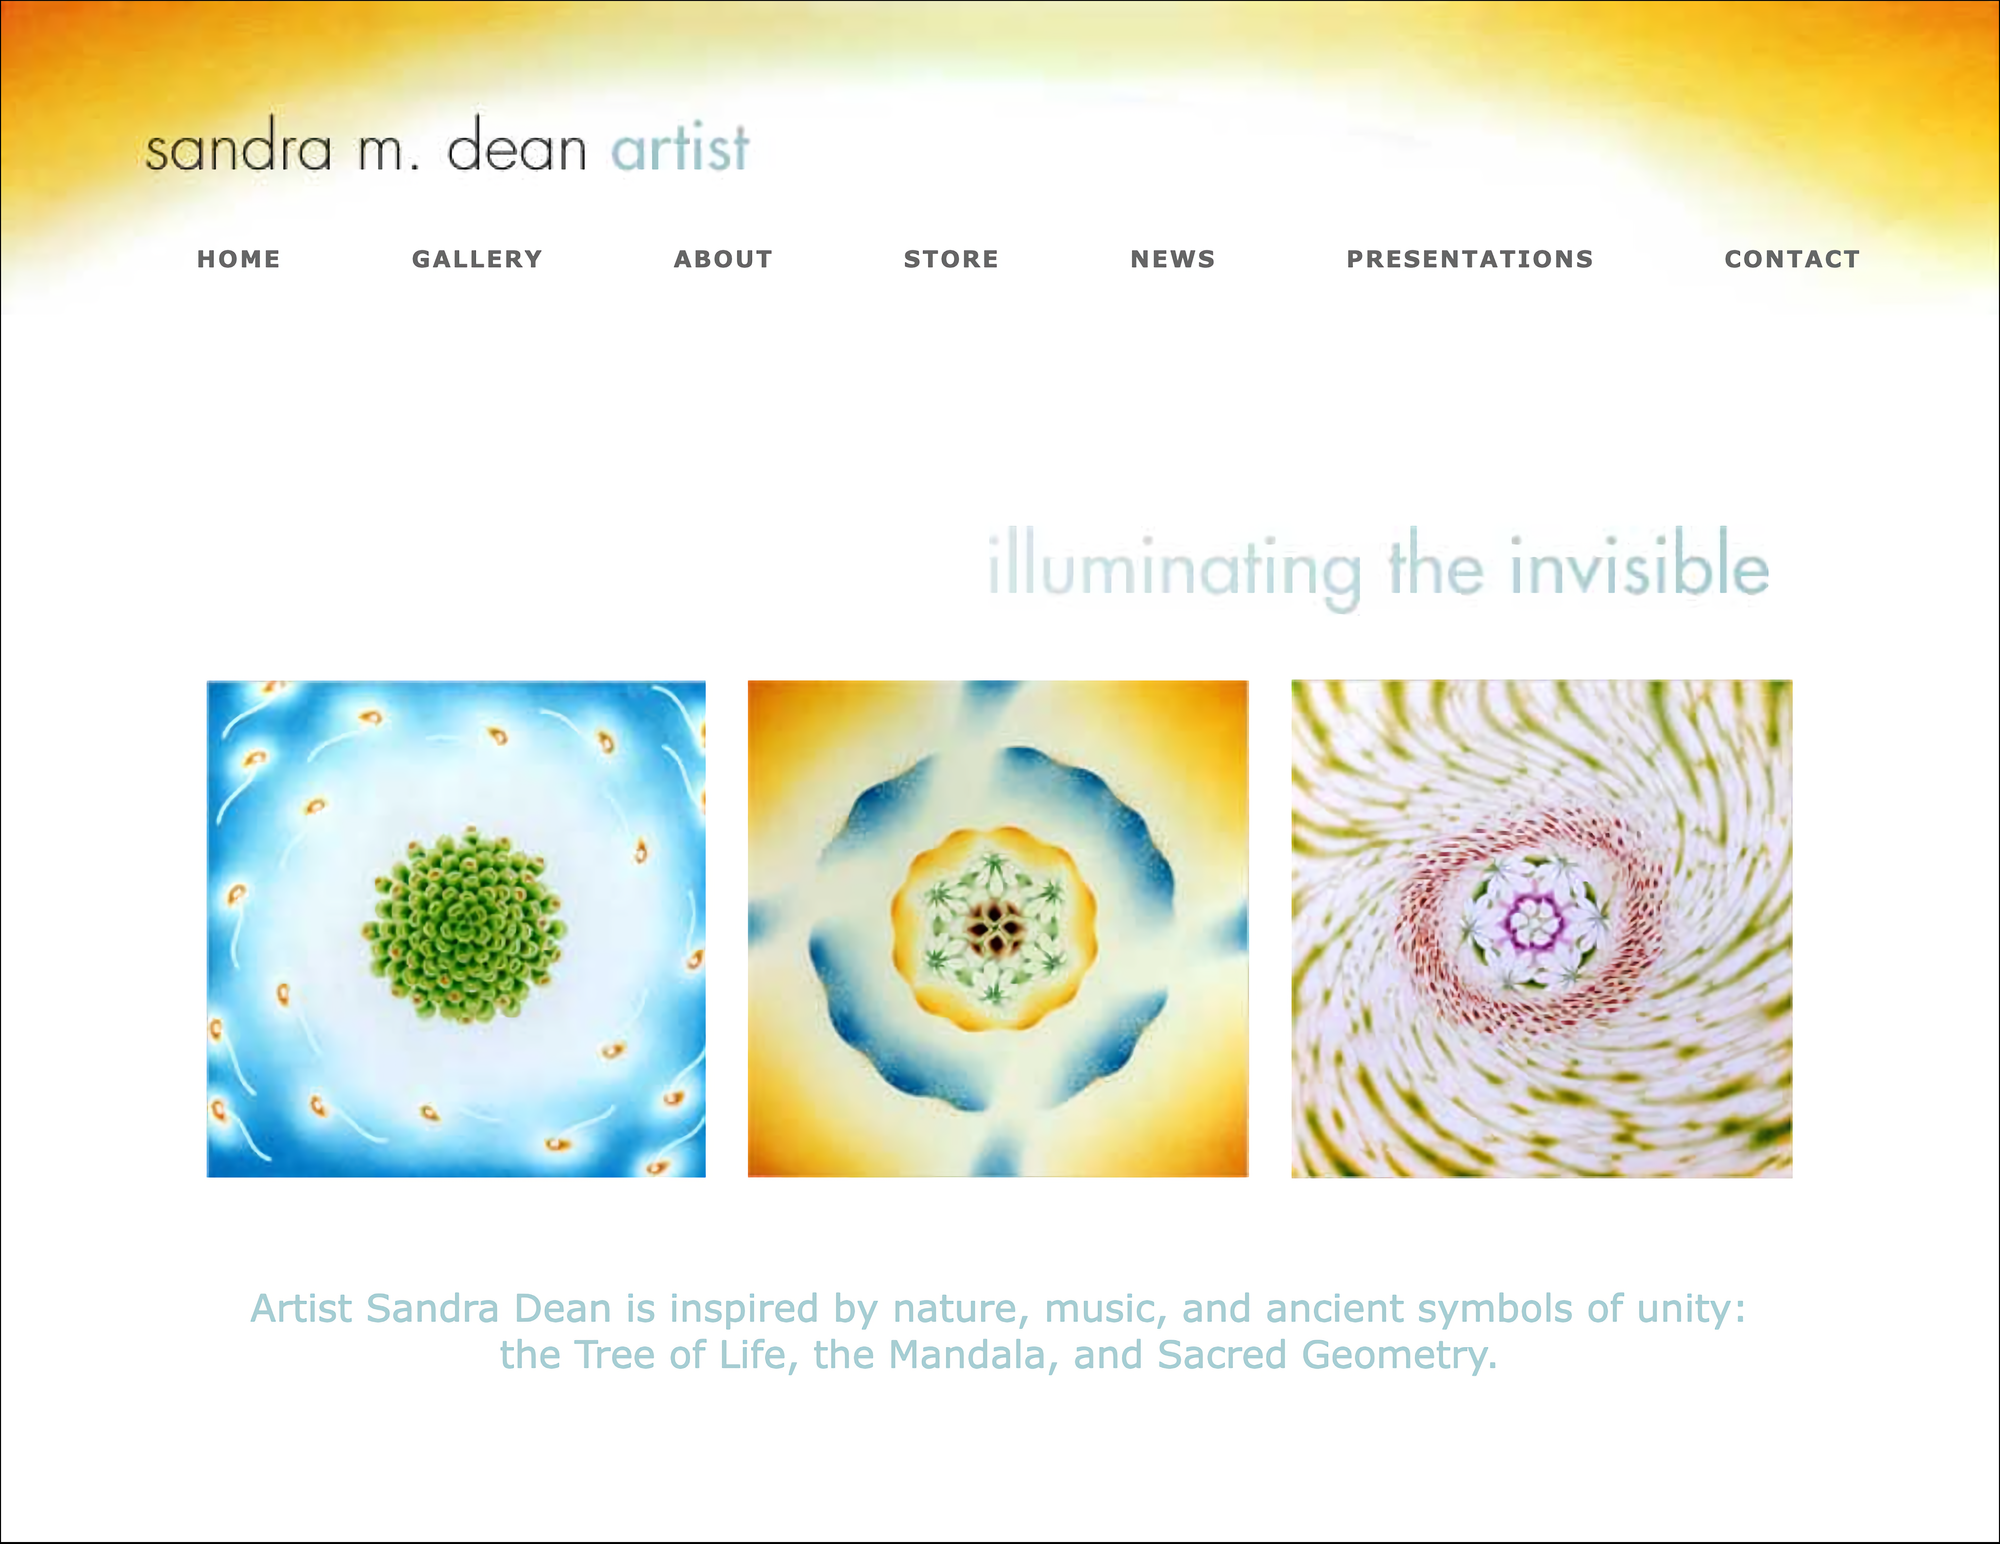 Image of home page showing three drawings with spiral patterns.